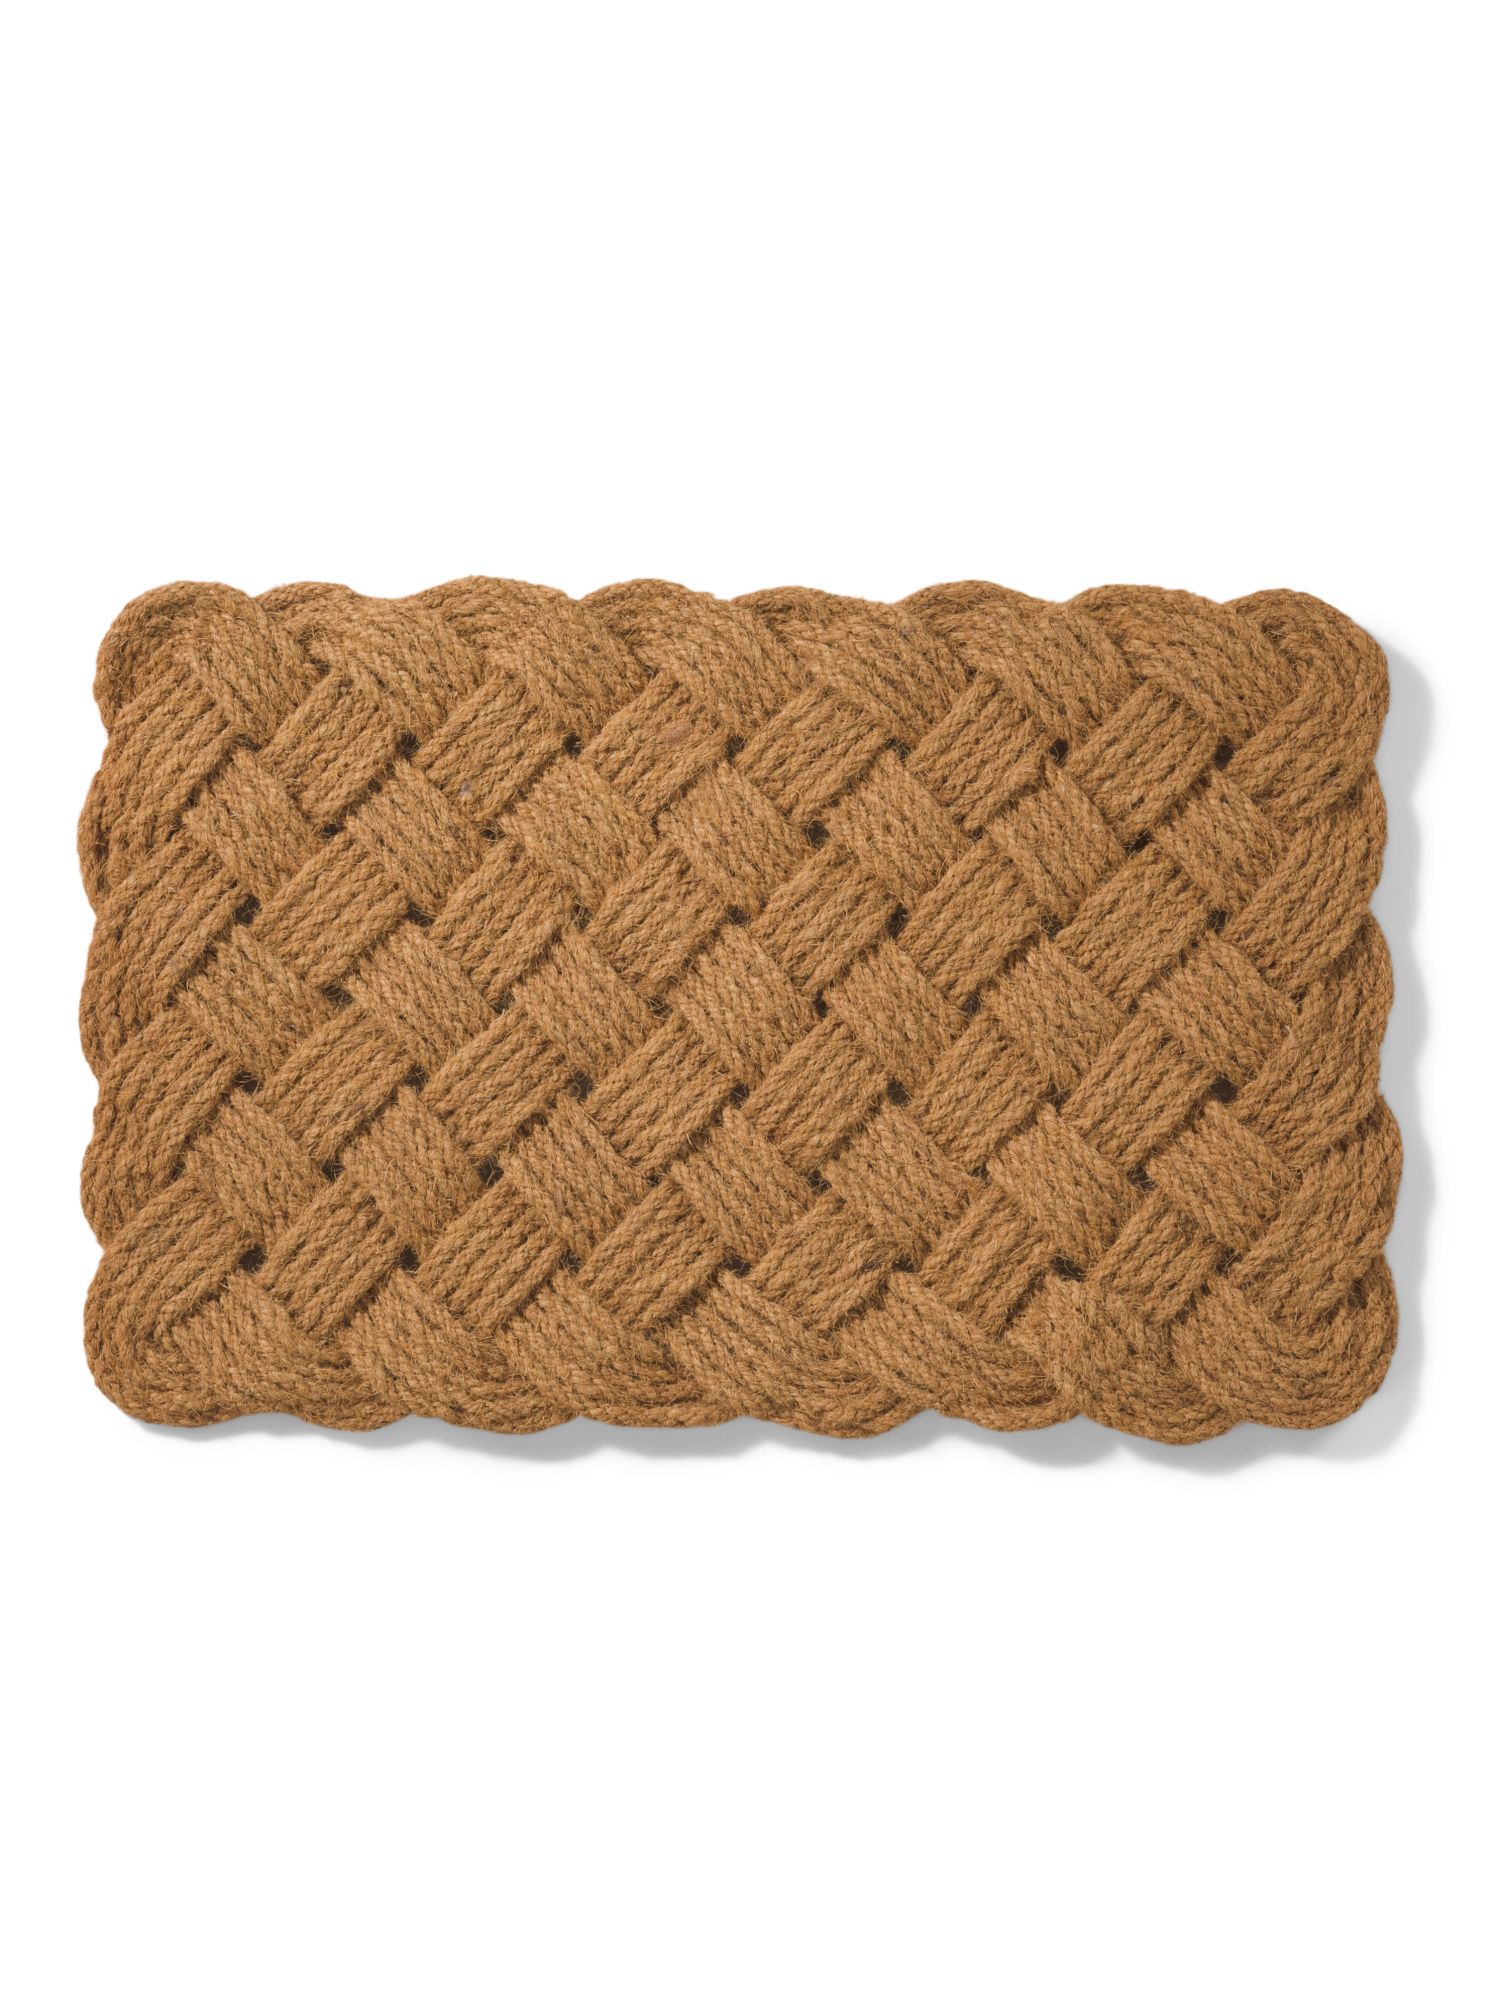 Natural Handwoven Knotted Rope Doormat | Rugs | Marshalls | Marshalls